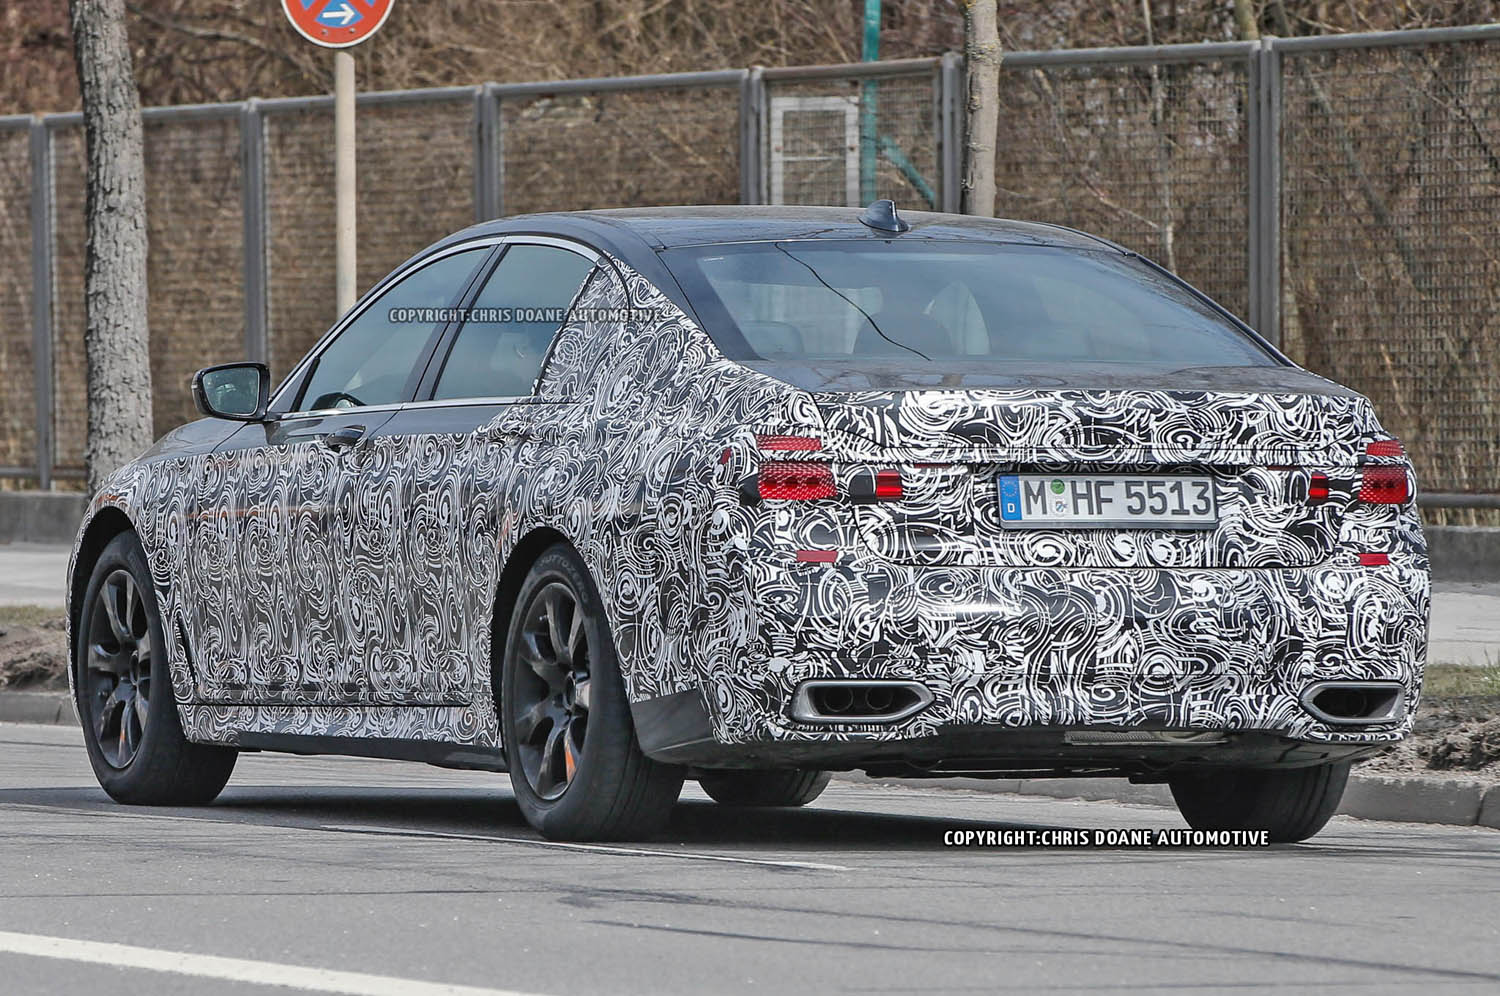 G11/G12 BMW 7 Series M Sport or M770i Spotted? - 7Post - 7 Series